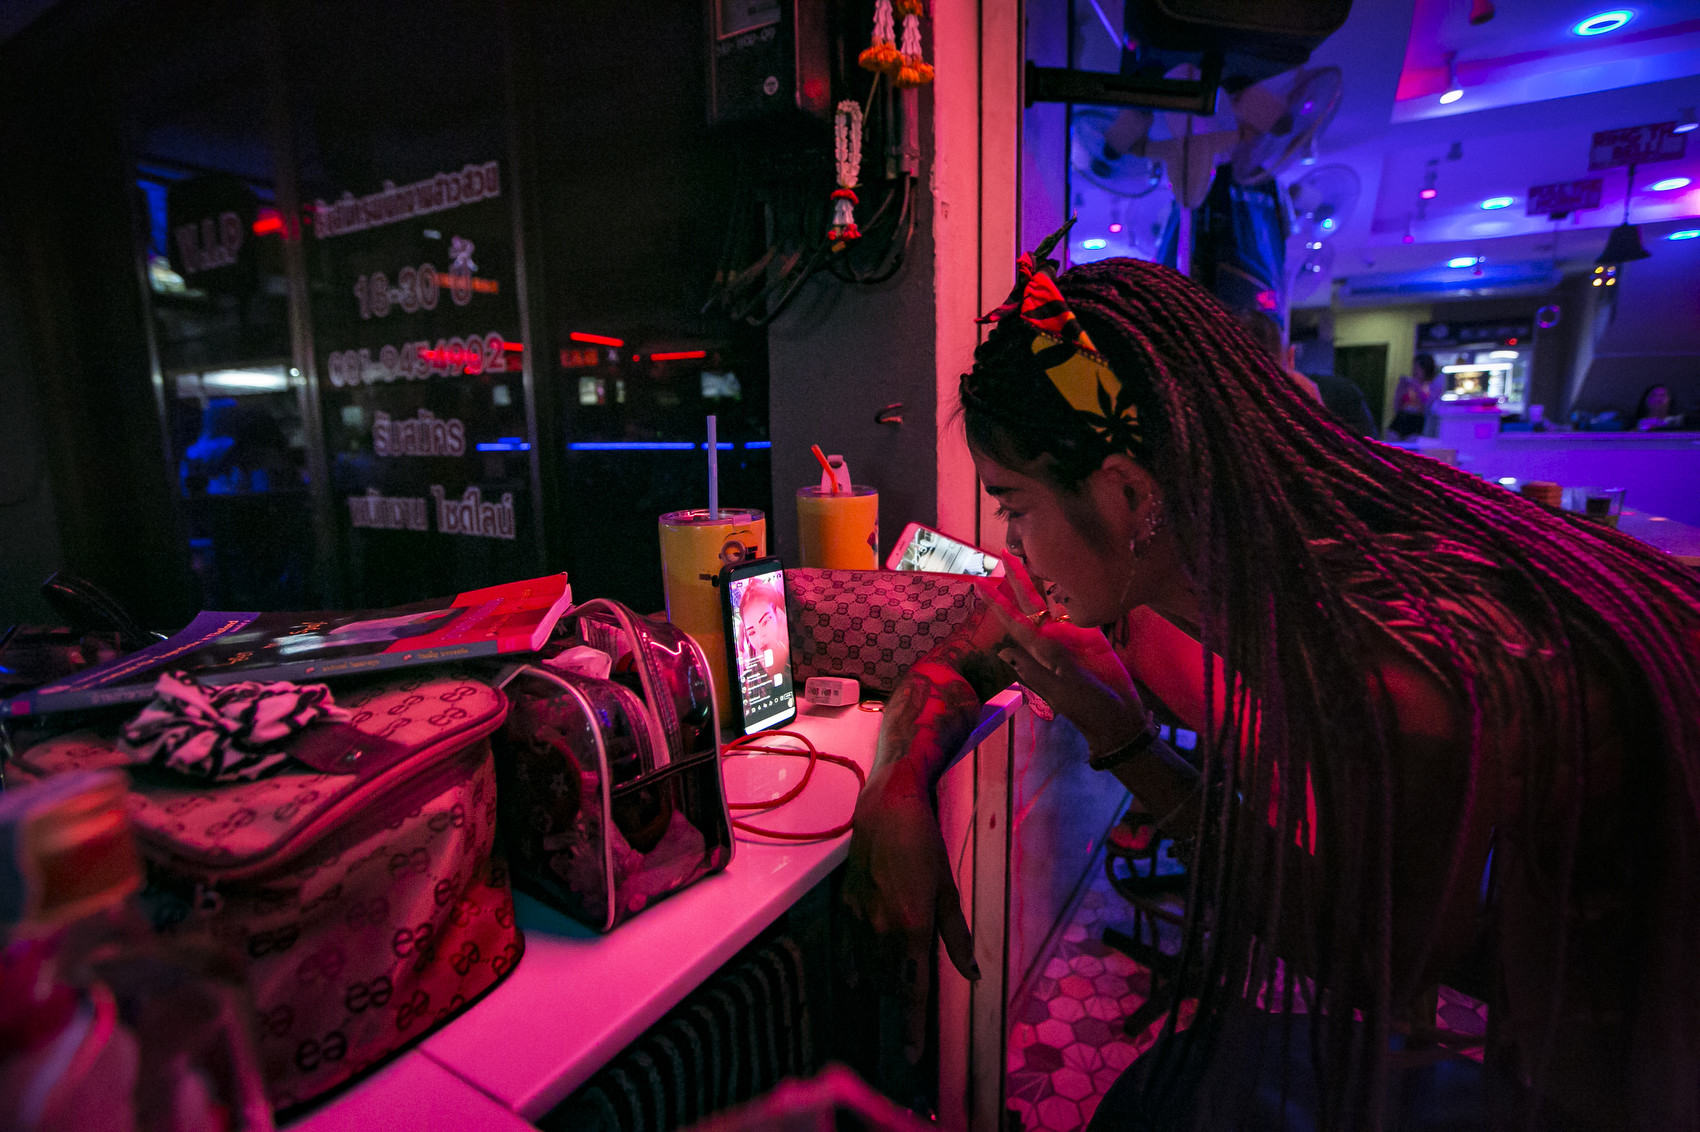 Nim goes live online at her bar  in a red light district in Pattaya , Thailand, September 12, 2020. As customers are relatively scare now, some sex workers have moved their services online, with livestreams over social media. The women will dance in front of the camera, enticing men to buy them a shot or send money over PayPal.With entry into Thailand still restricted, and relatively few tourists able to enter, a good living has turned into a bad one for the country's sex workers.